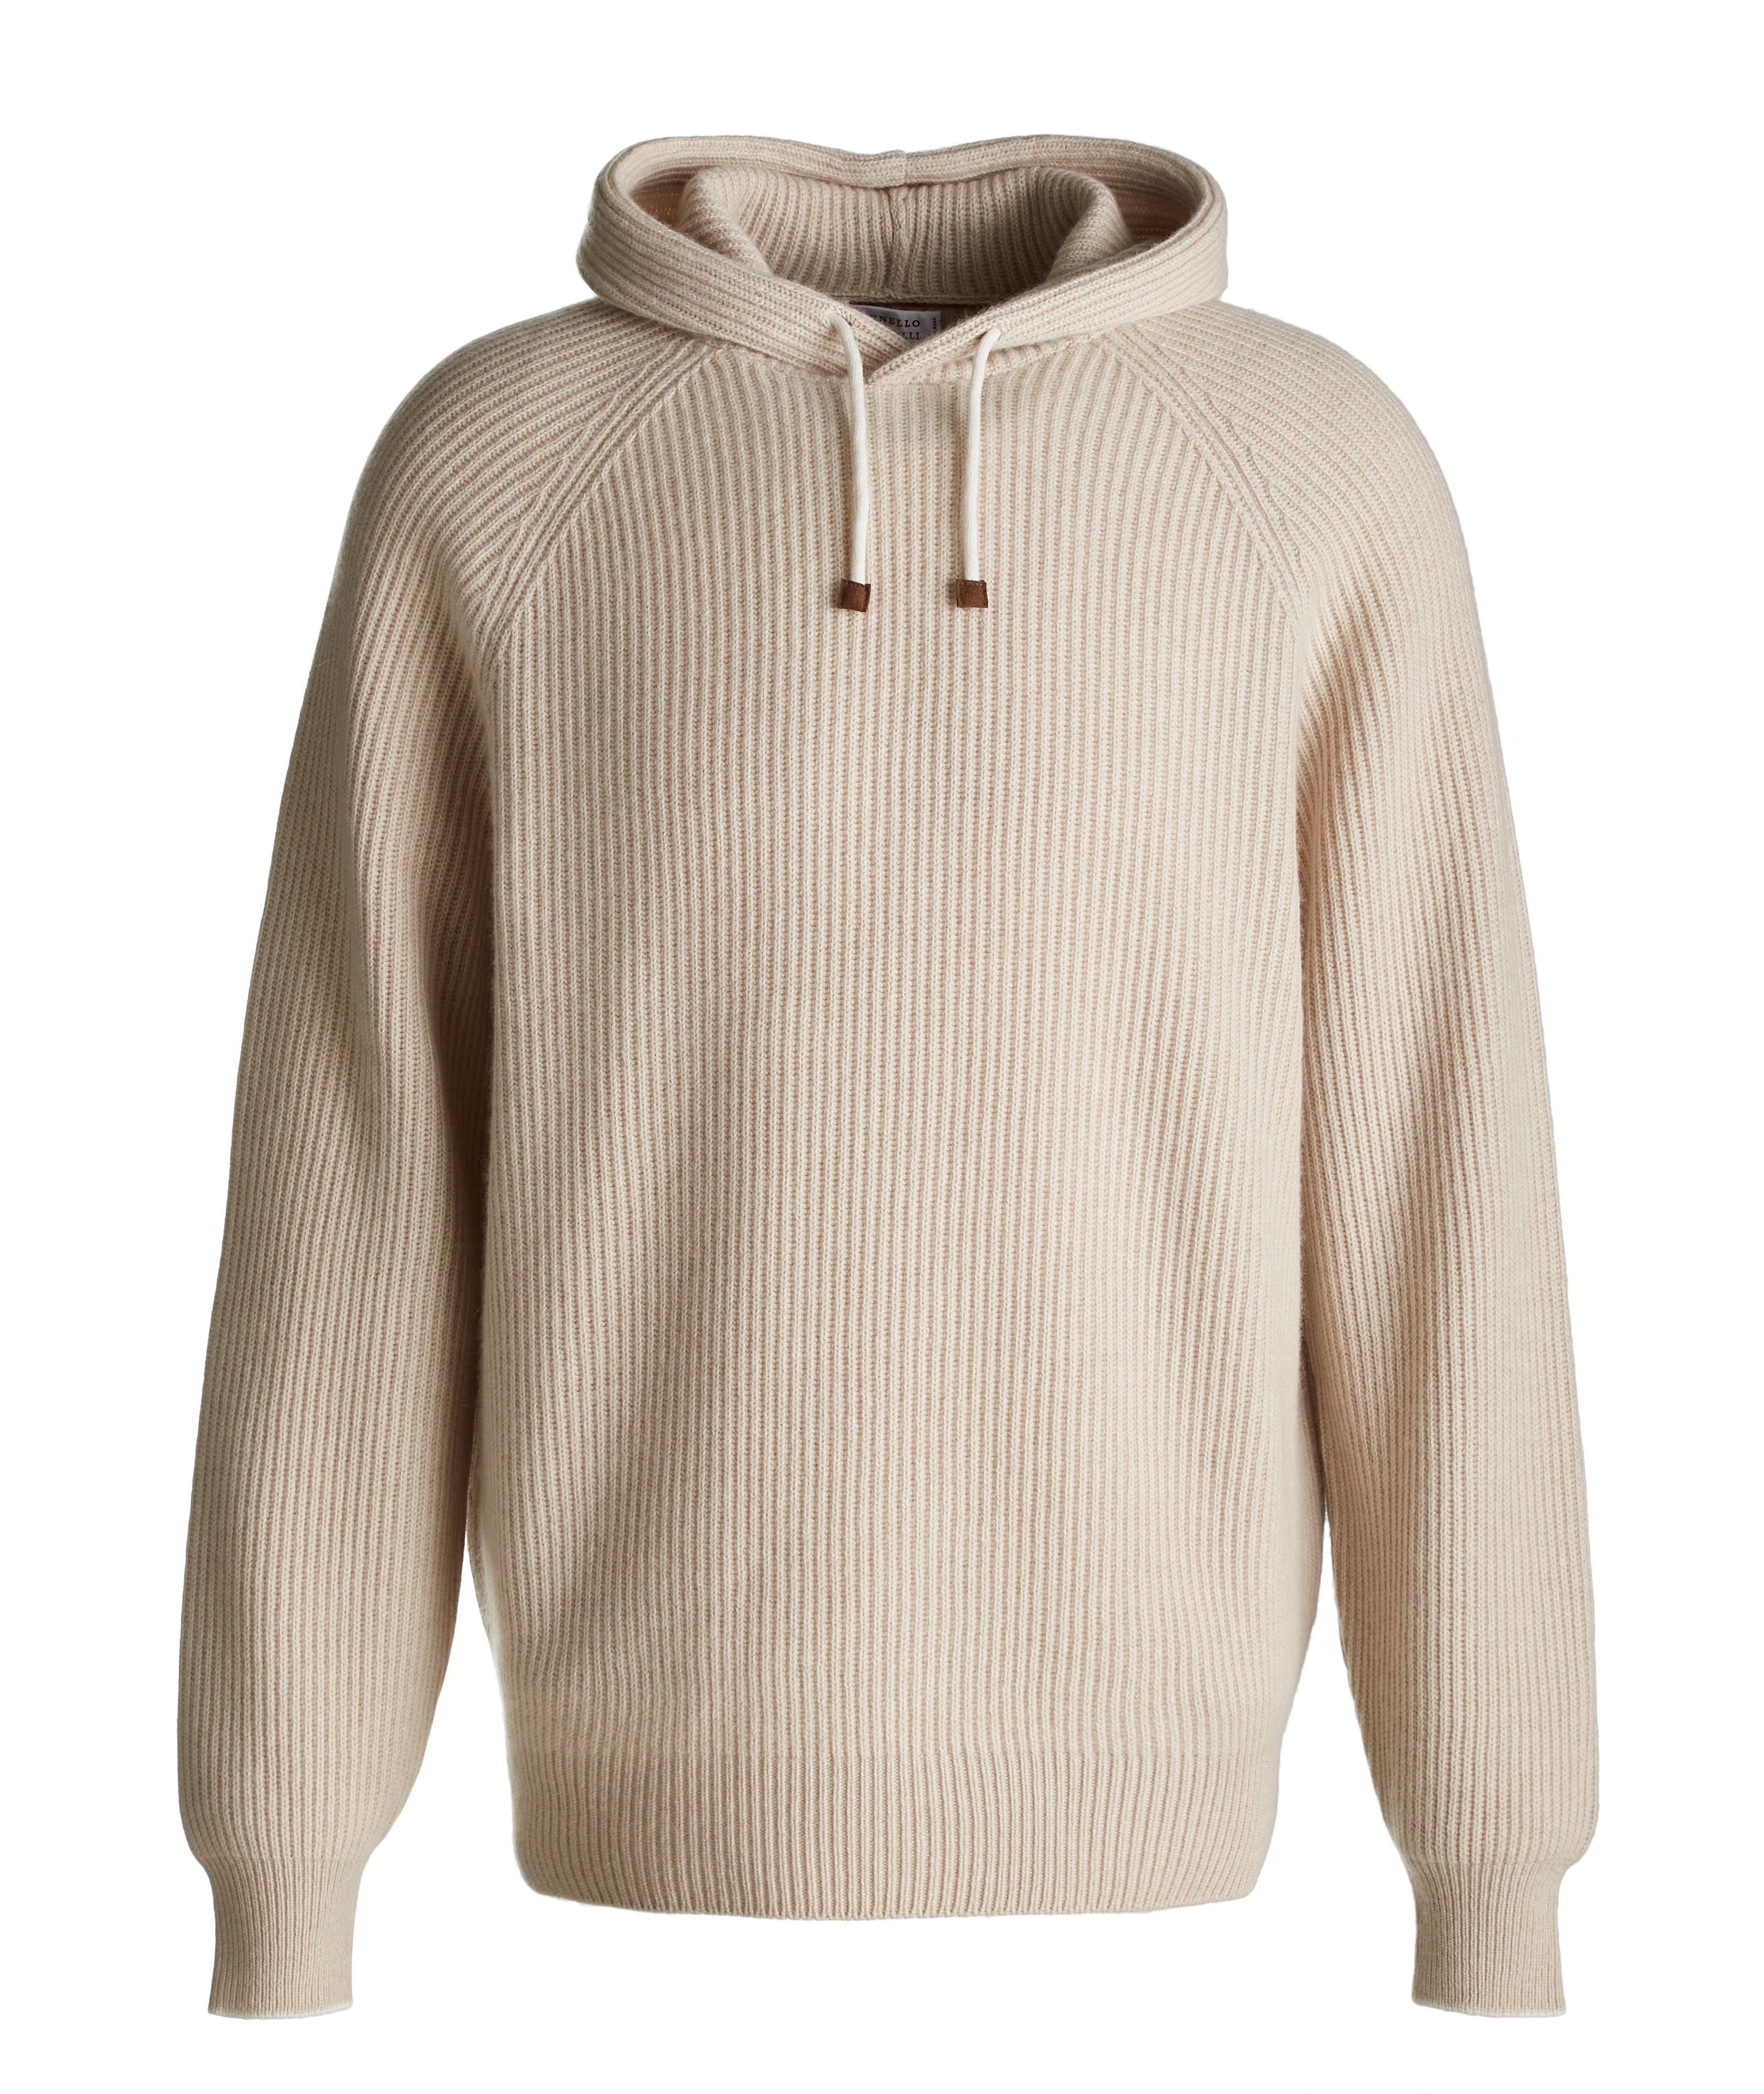 Knitted Cashmere Hoodie image 0